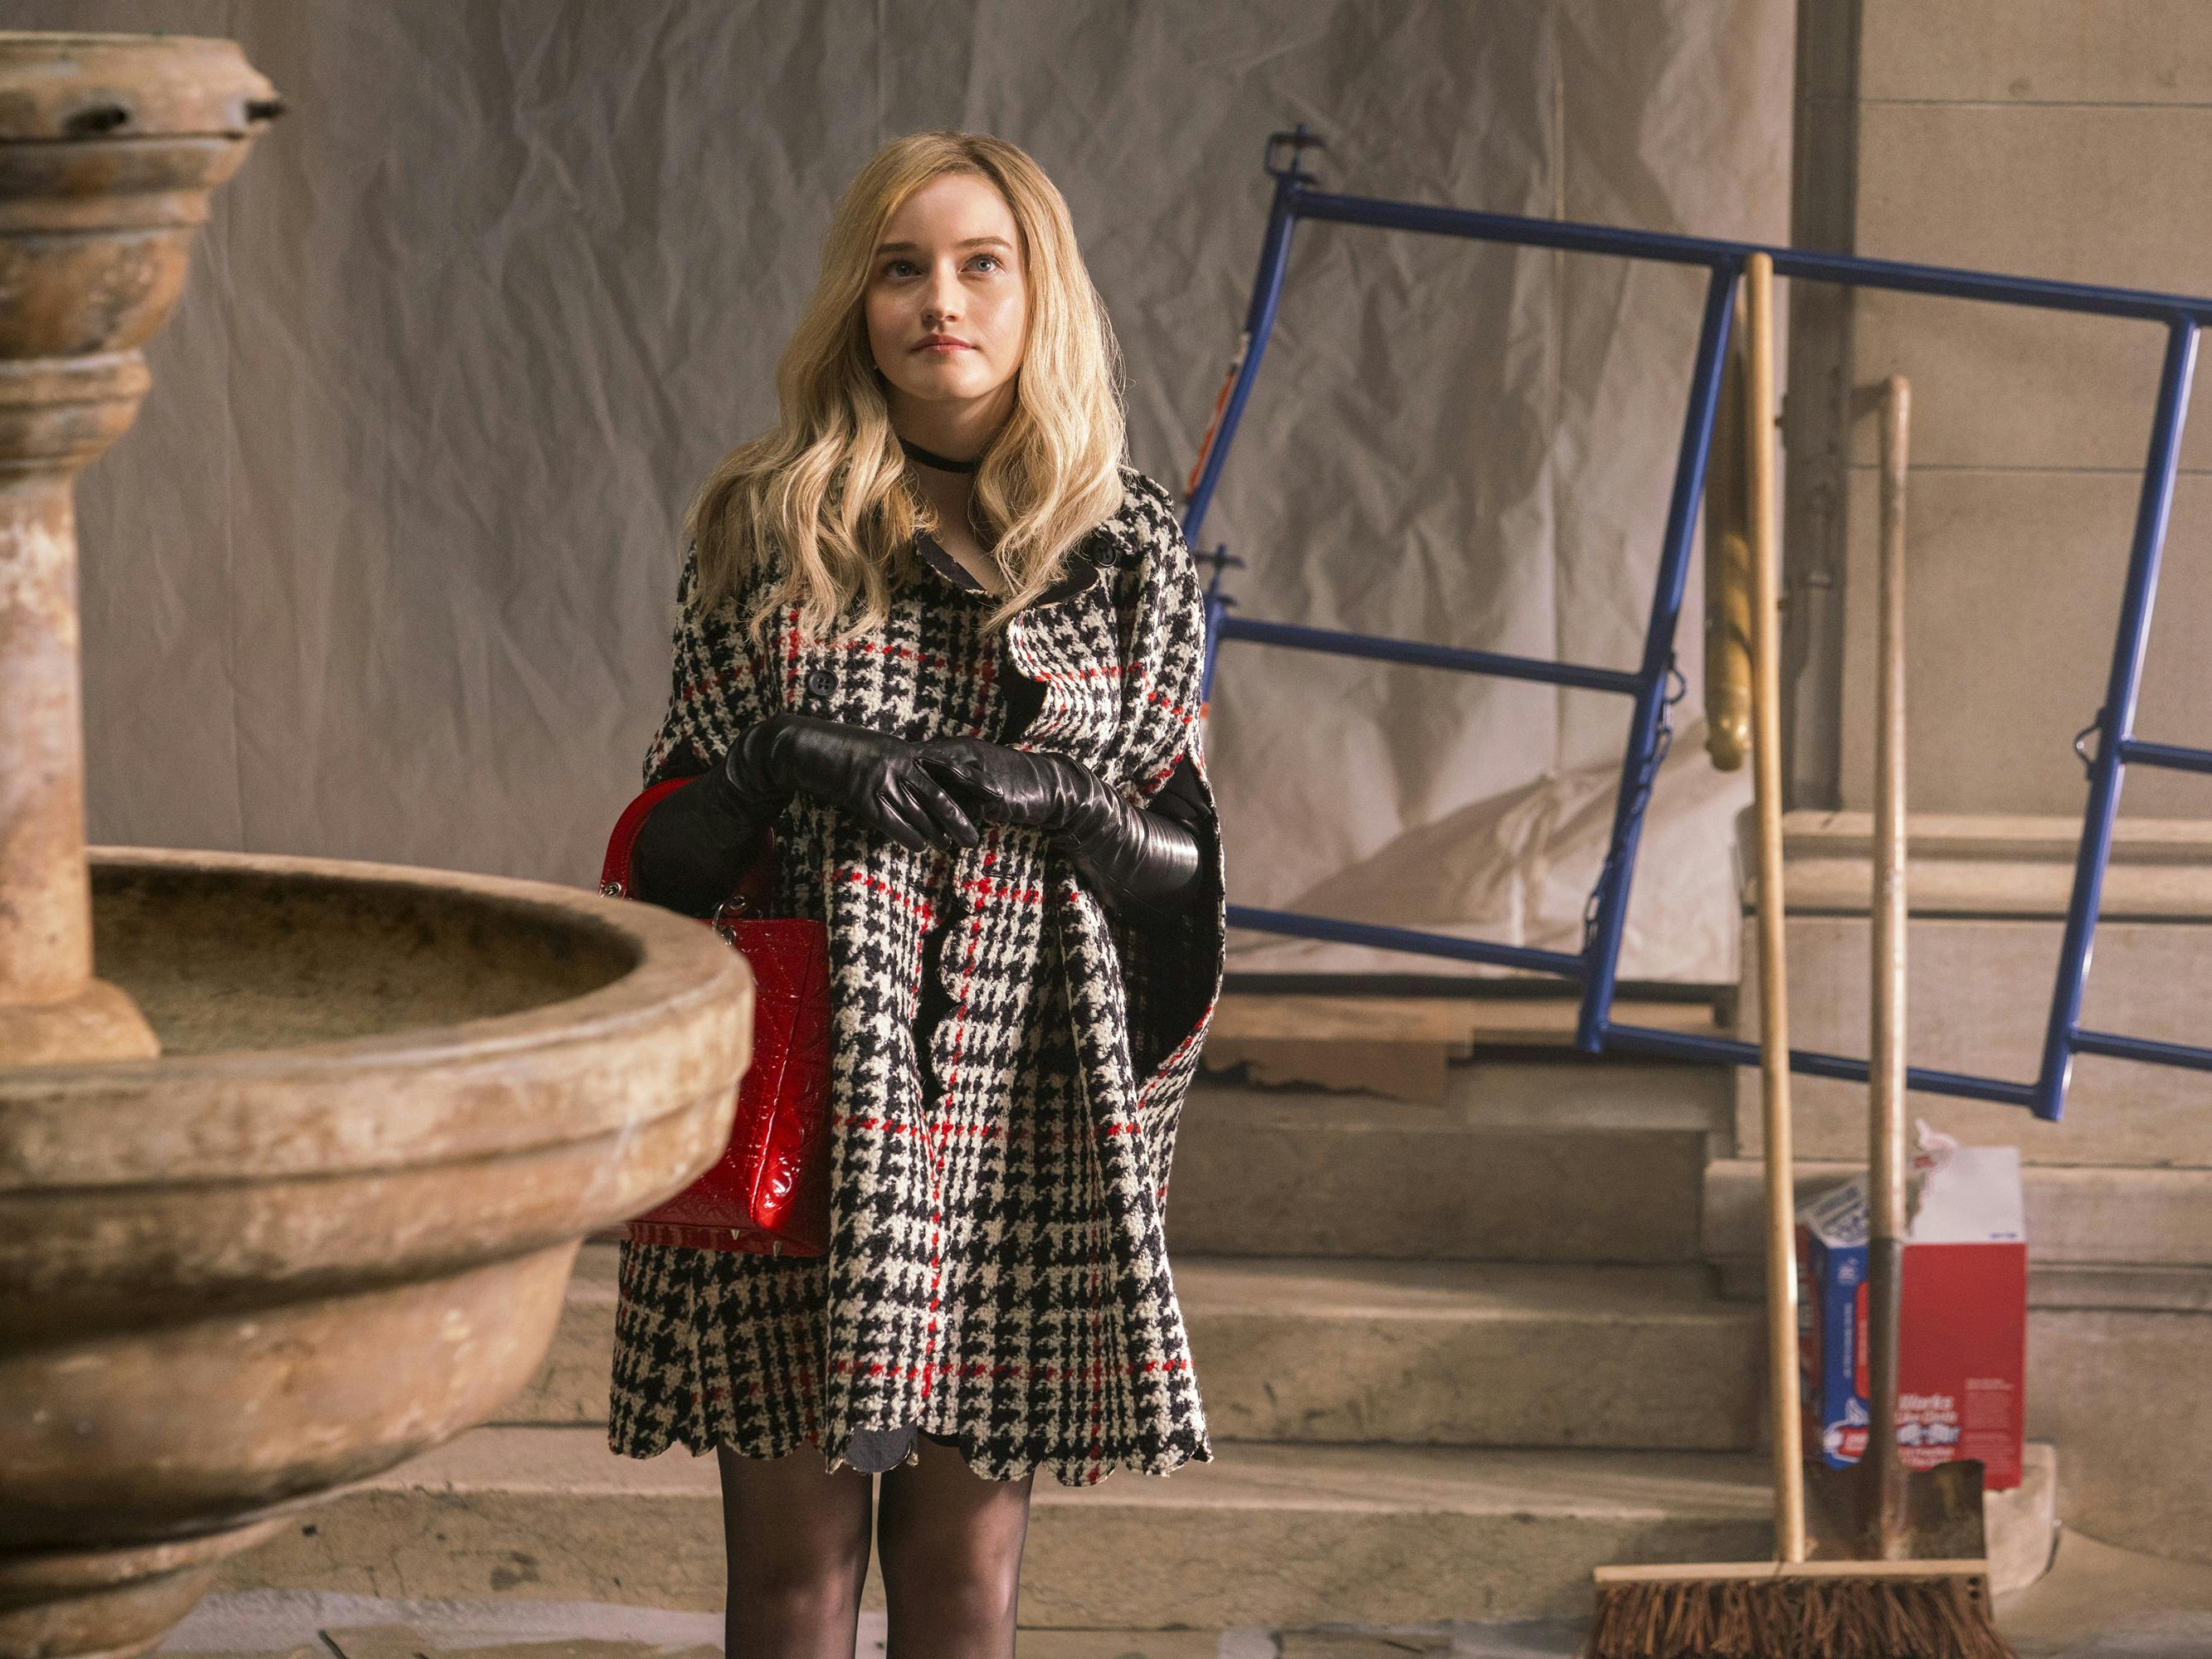 Anna Delvey (Julia Garner) wears a houndstooth poncho and stands in a construction site looking hopeful.